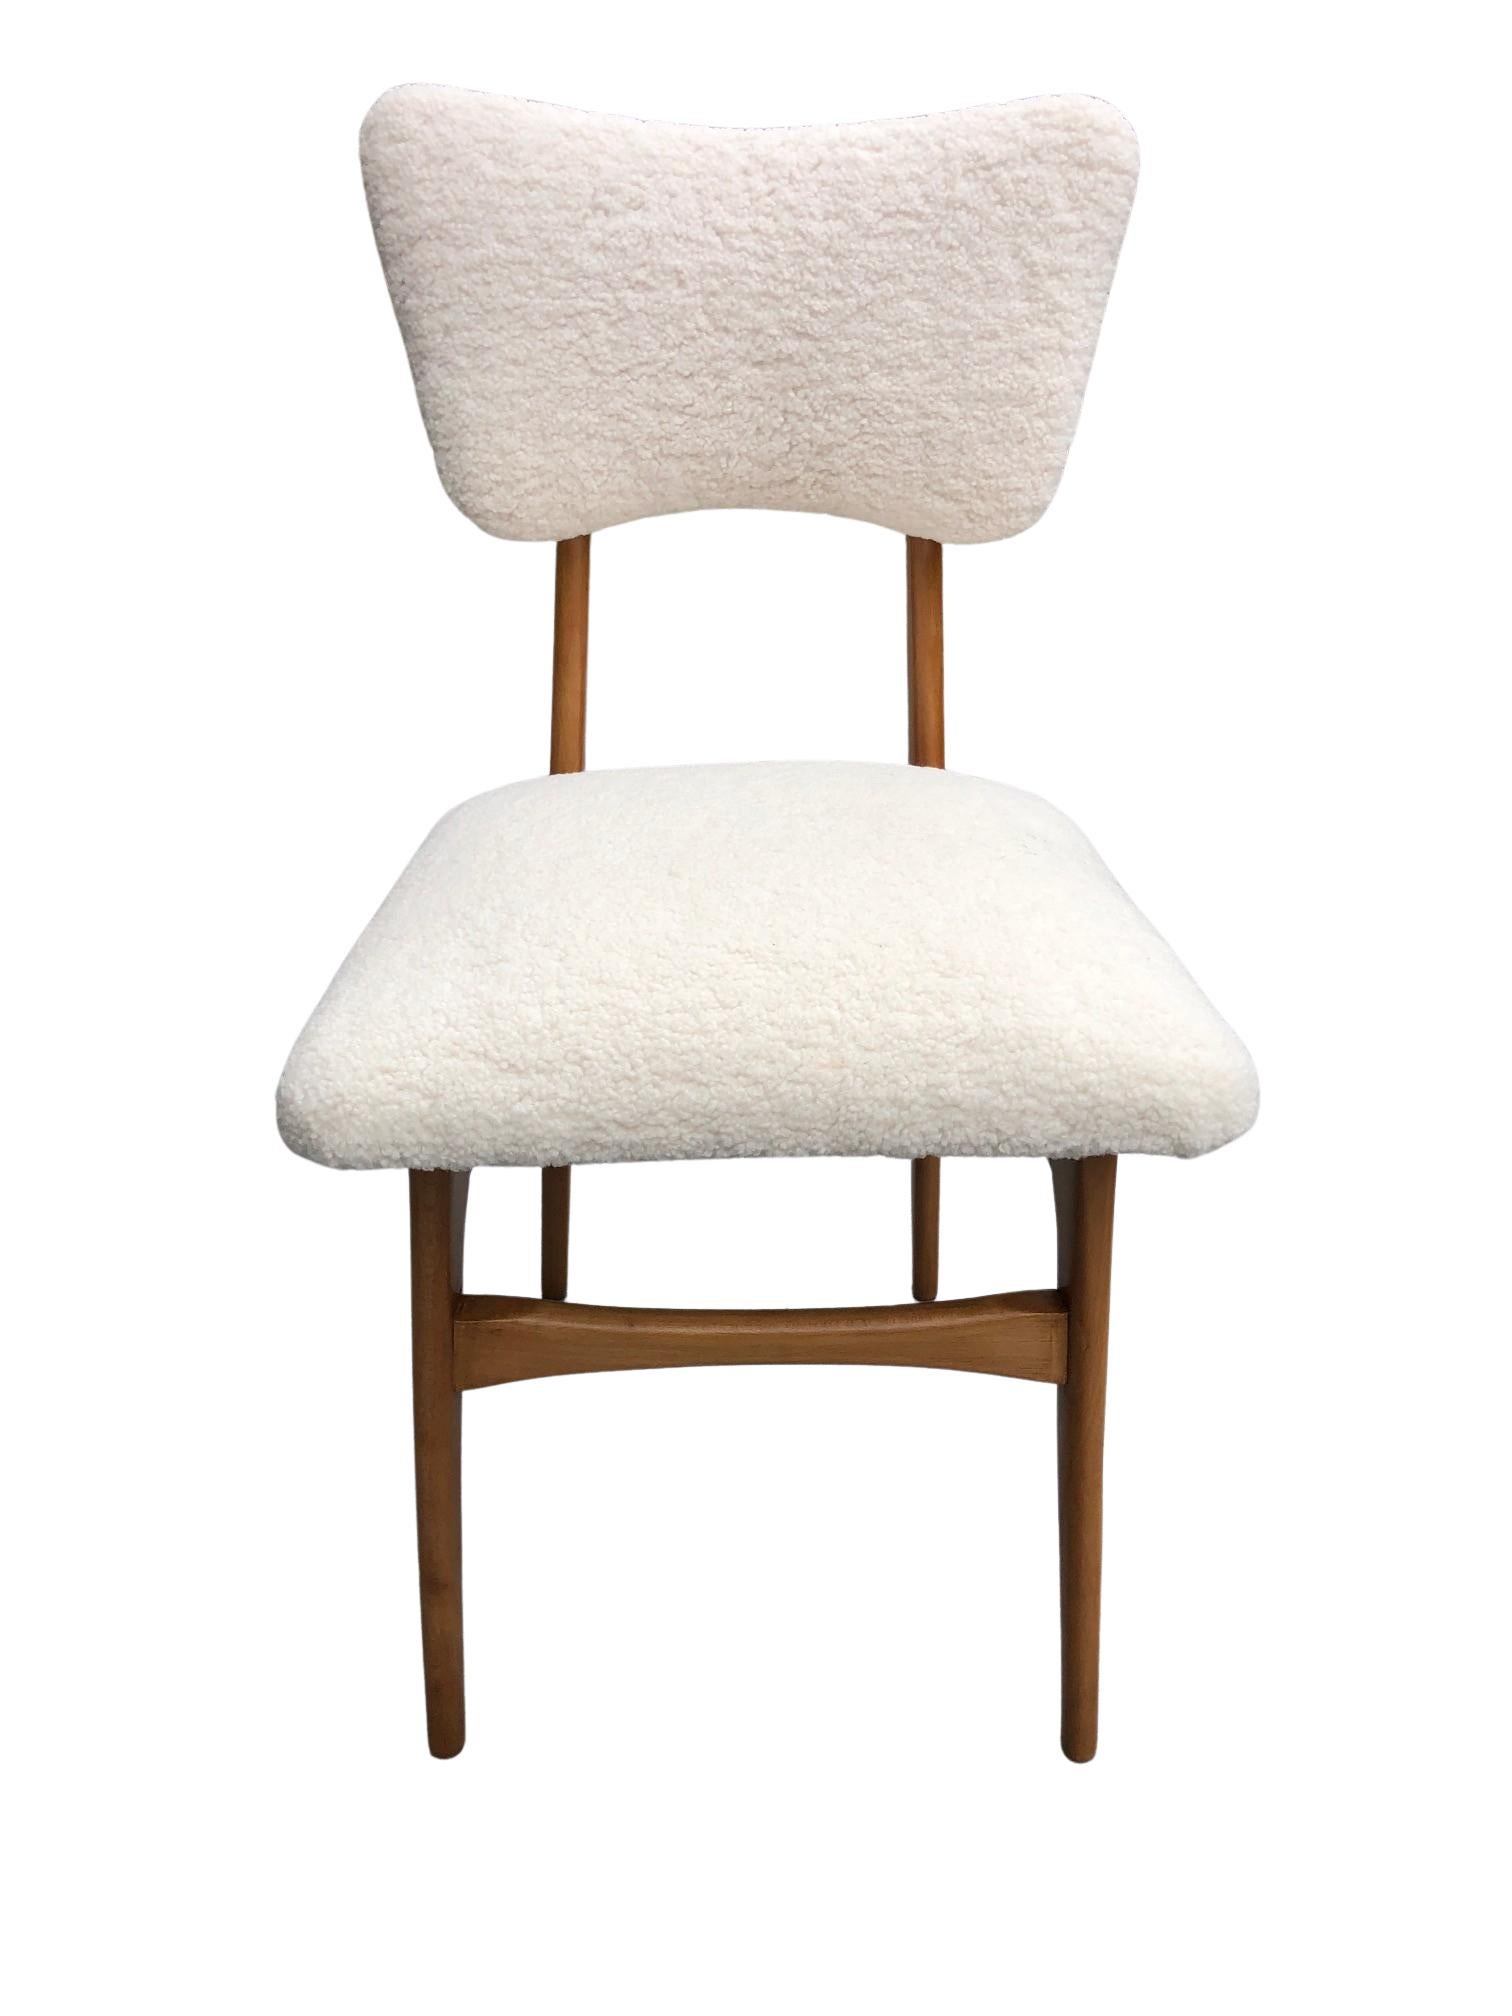 Unique chair manufactured in Poland in the 1960s, designed by Rajmund Halas. 

The upholstery is made of pleasant to touch bouclé textile. It is high quality and durable italian fabric in a light beige color. The chair structure is made of beechwood